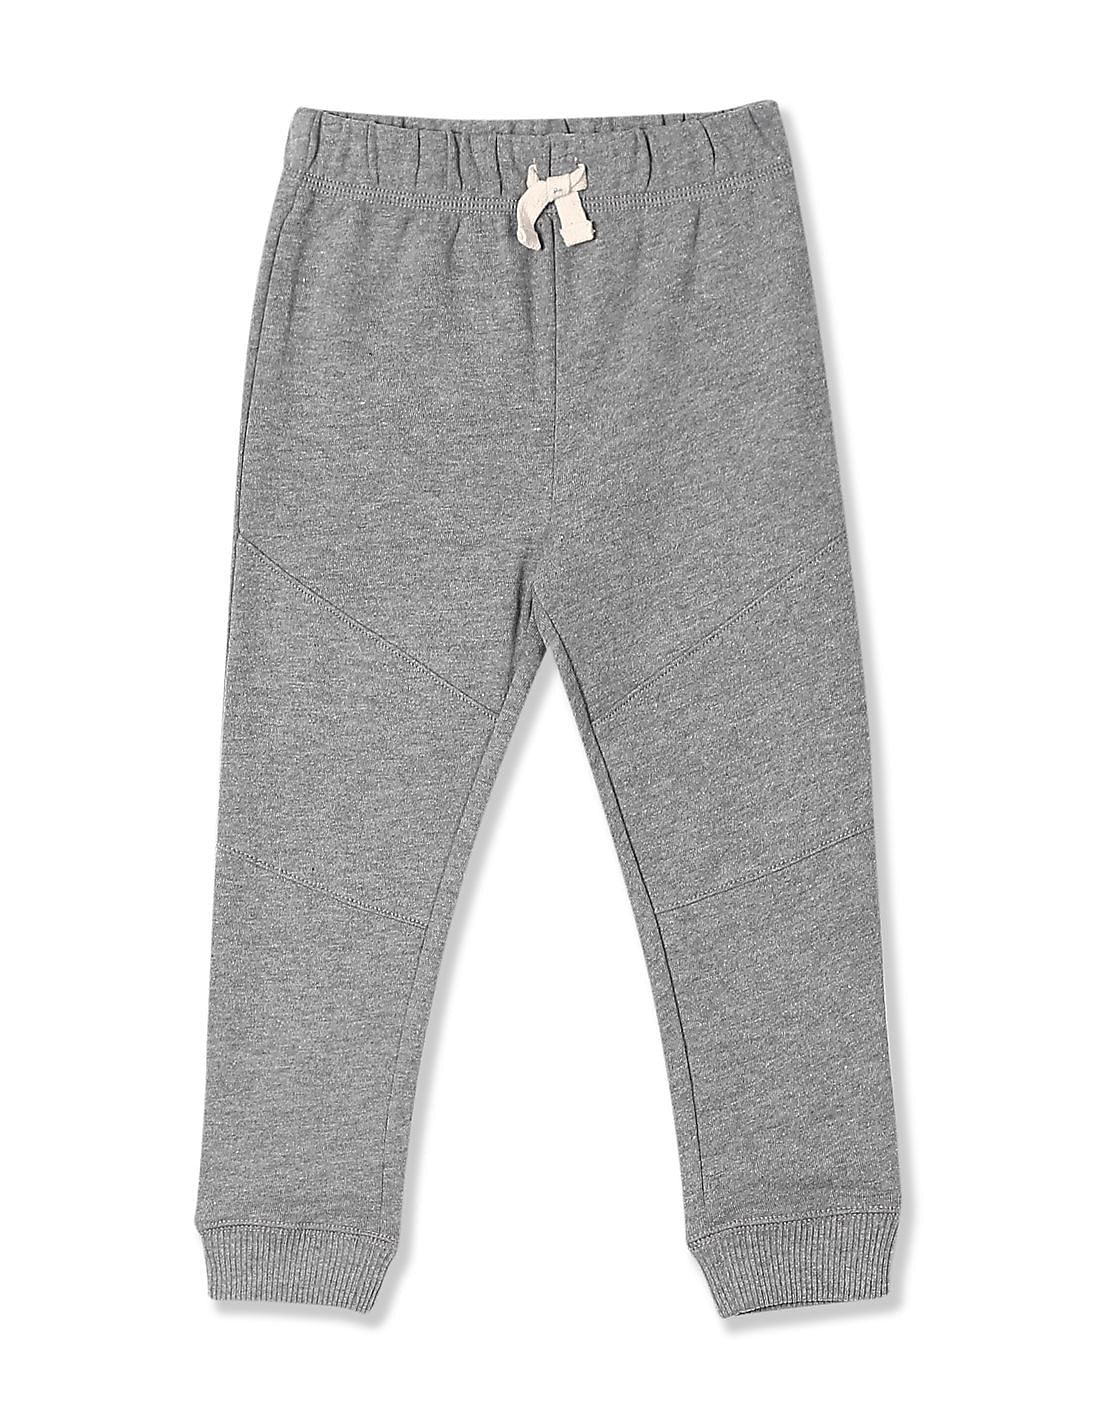 Buy The Children's Place Boys Grey Active French Terry Jogger Pants ...